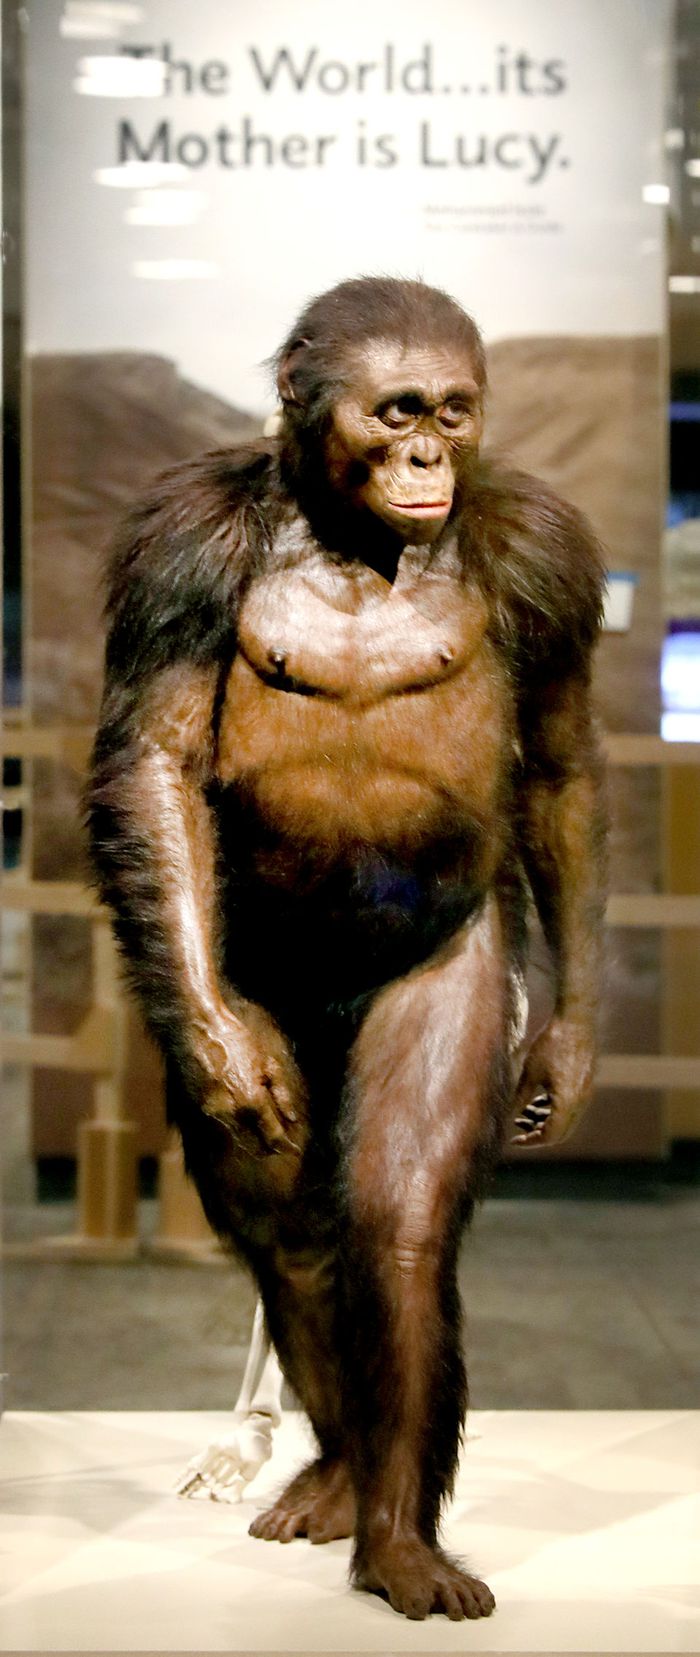 Lucy walked upright, qualifying her as an early human. Chuck Crow The Plain Dealer.jpeg